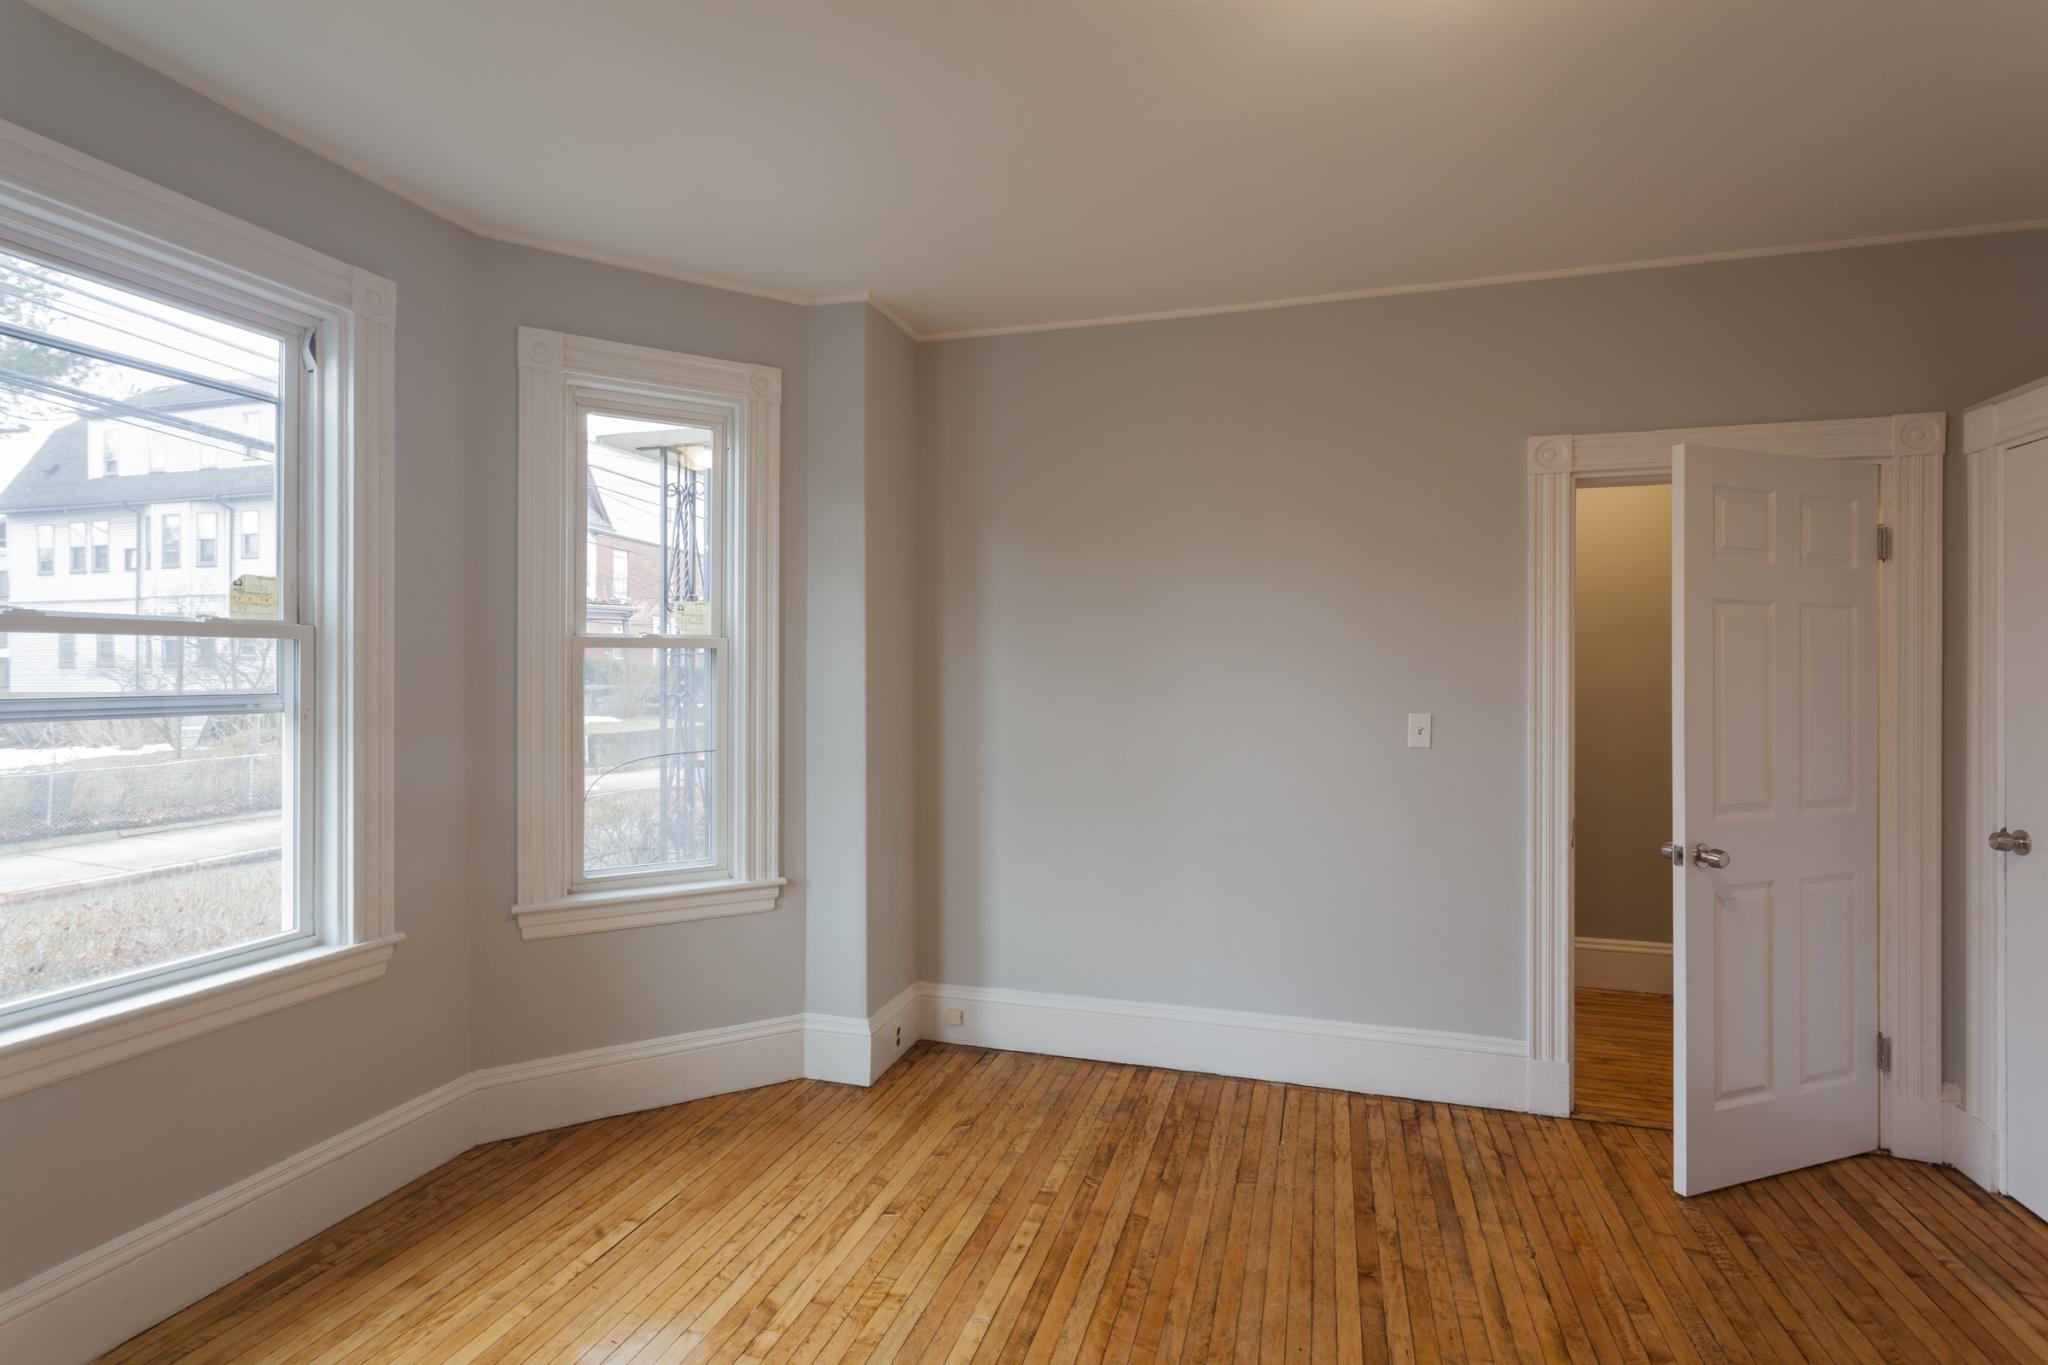 Photos of apartment on Cherry St.,Somerville MA 02144